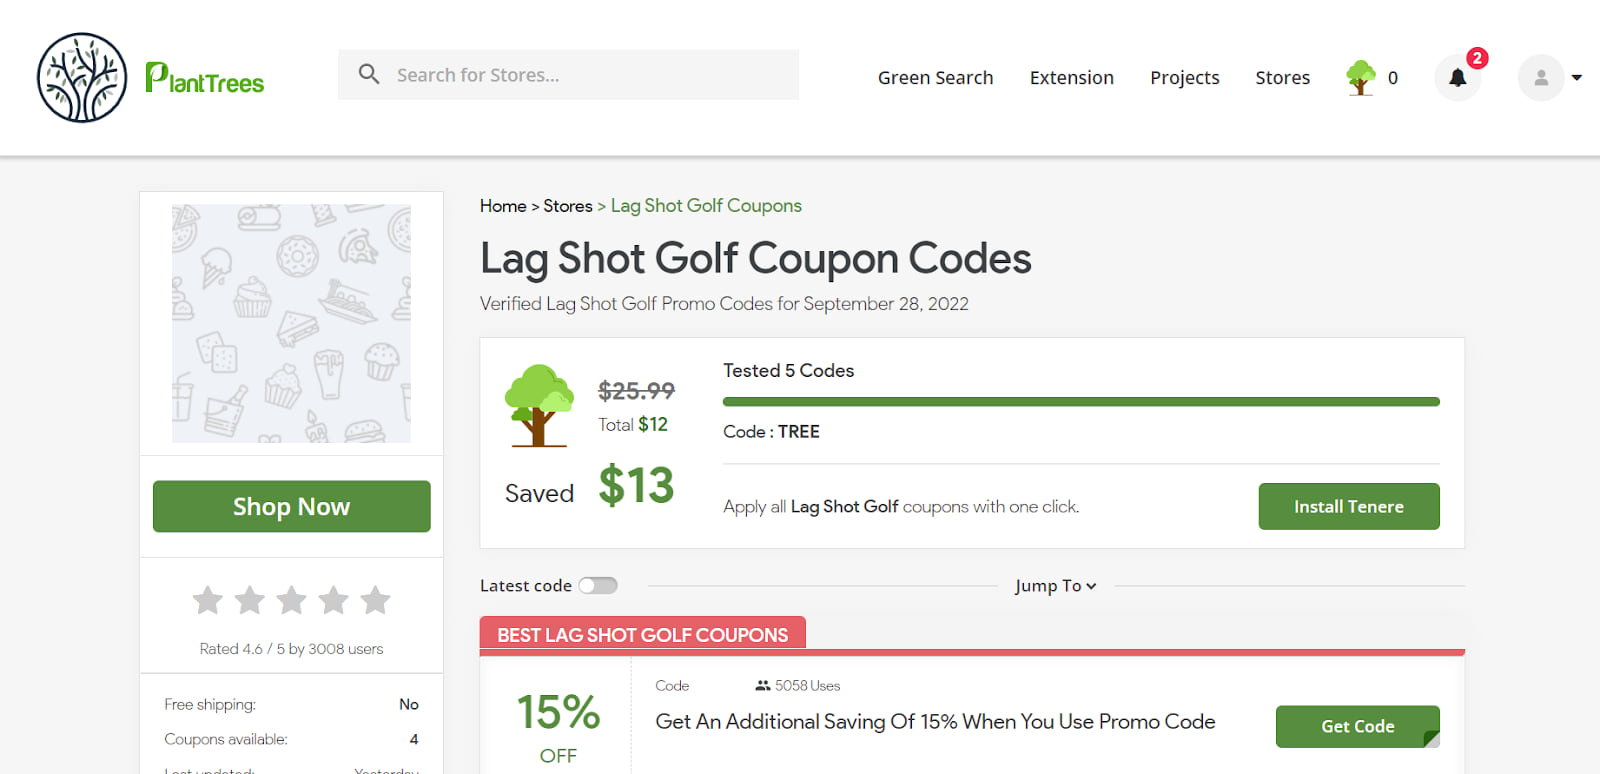 How to use Lag Shot Golf coupon